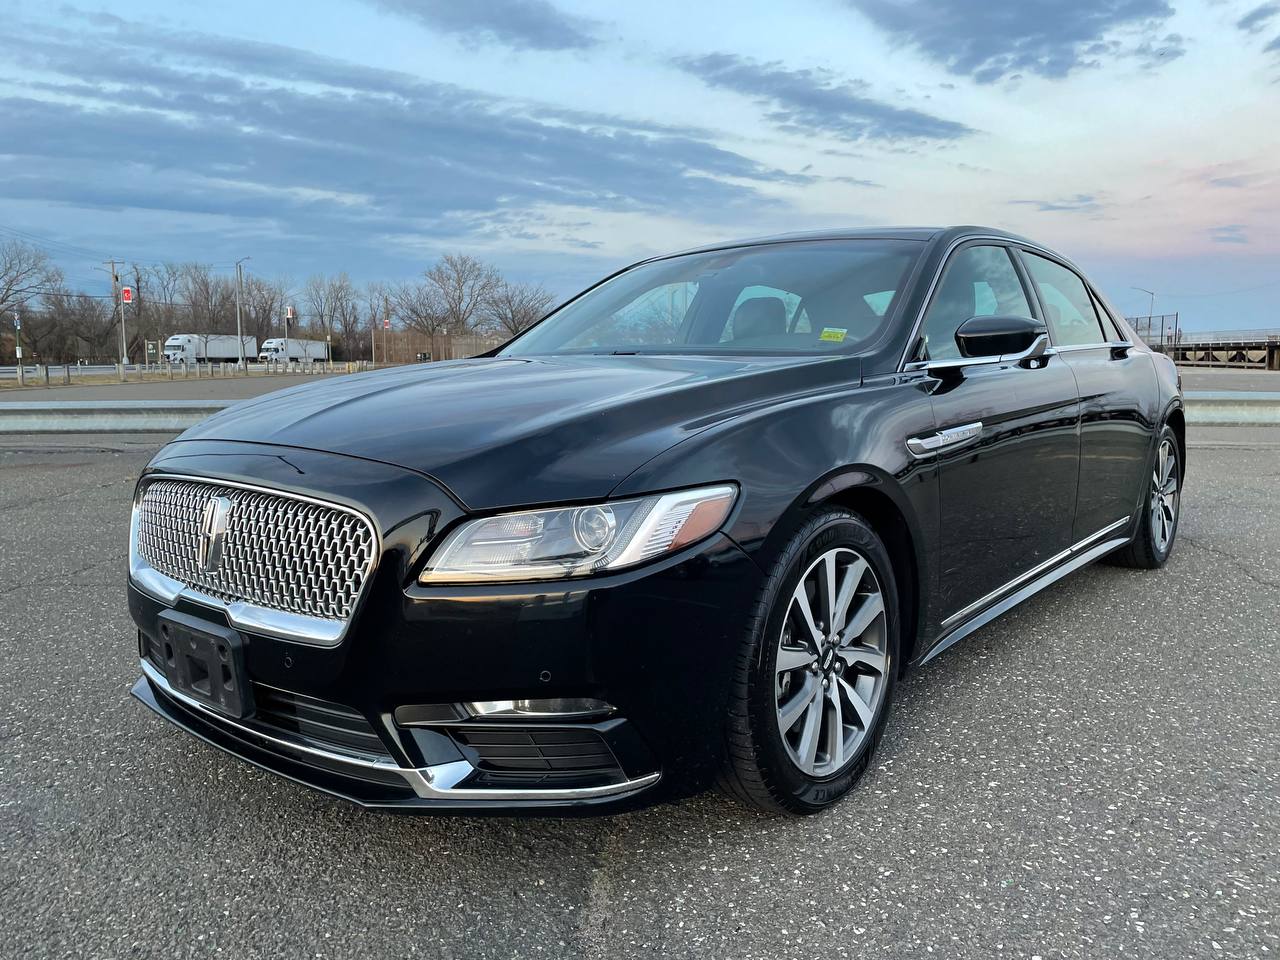 Used Car - 2018 Lincoln Continental for Sale in Brooklyn, NY